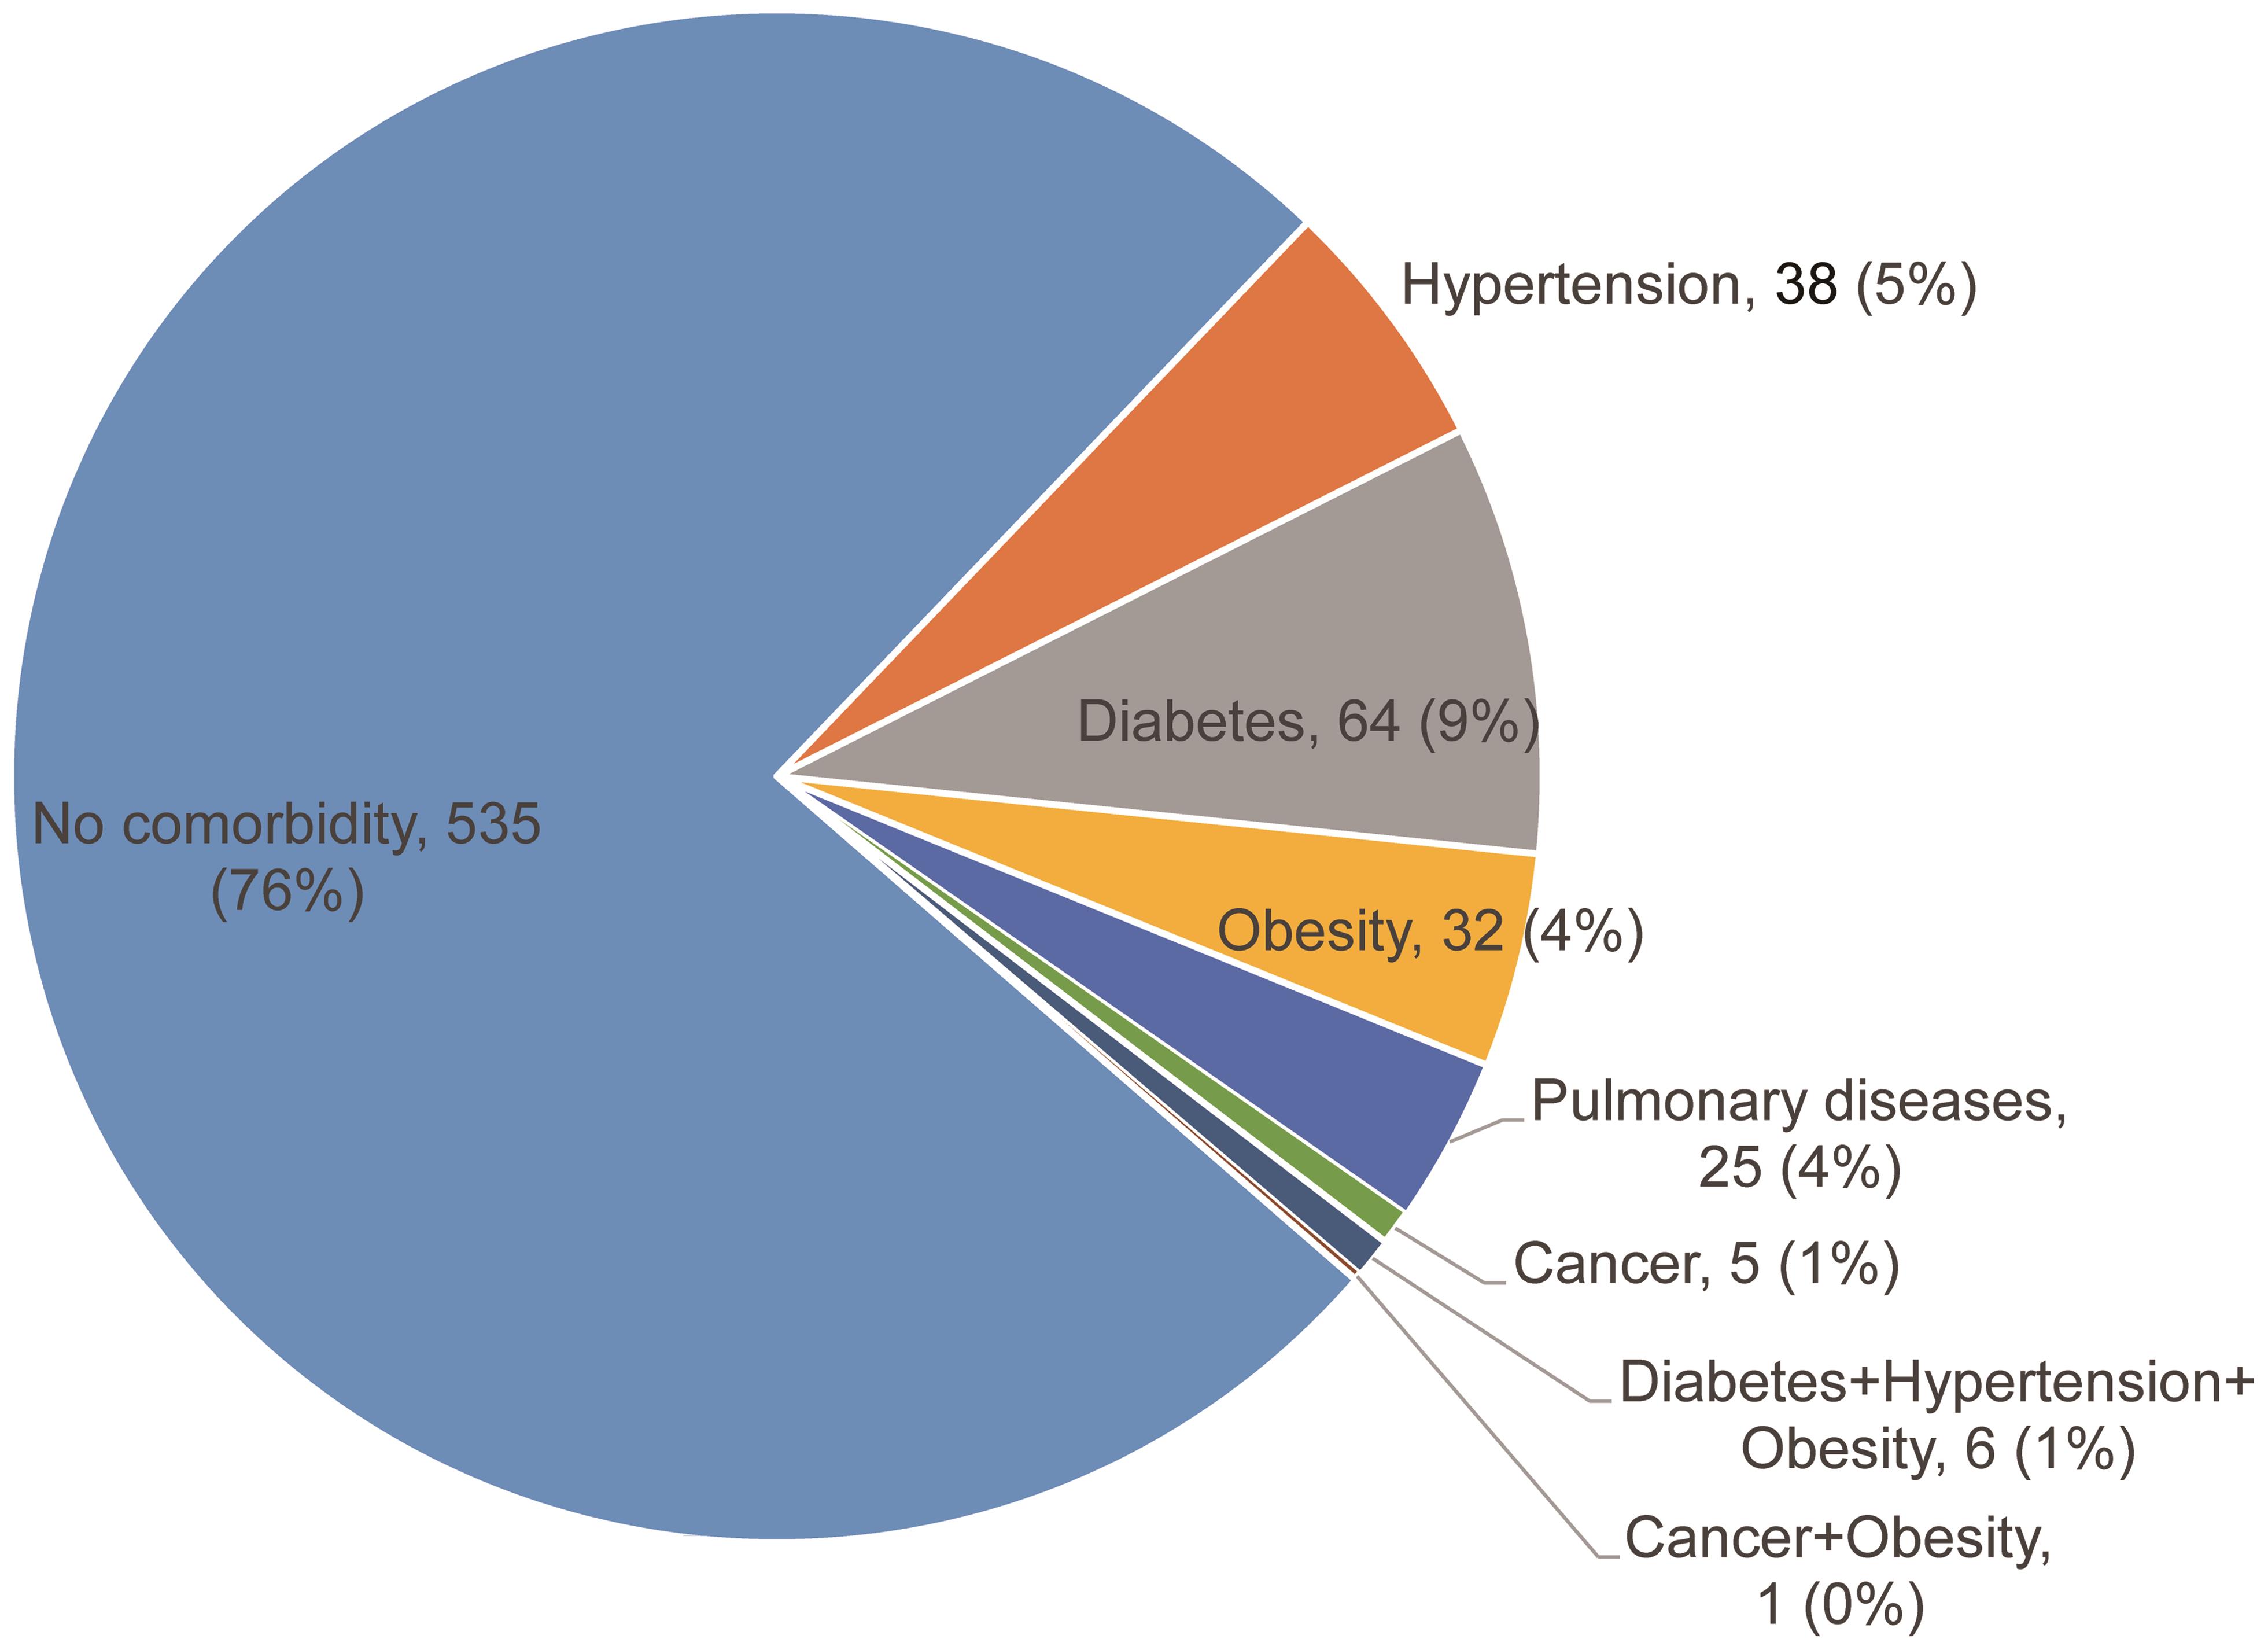 Status of comorbidity in participants who recovered from COVID-19 in the present survey.